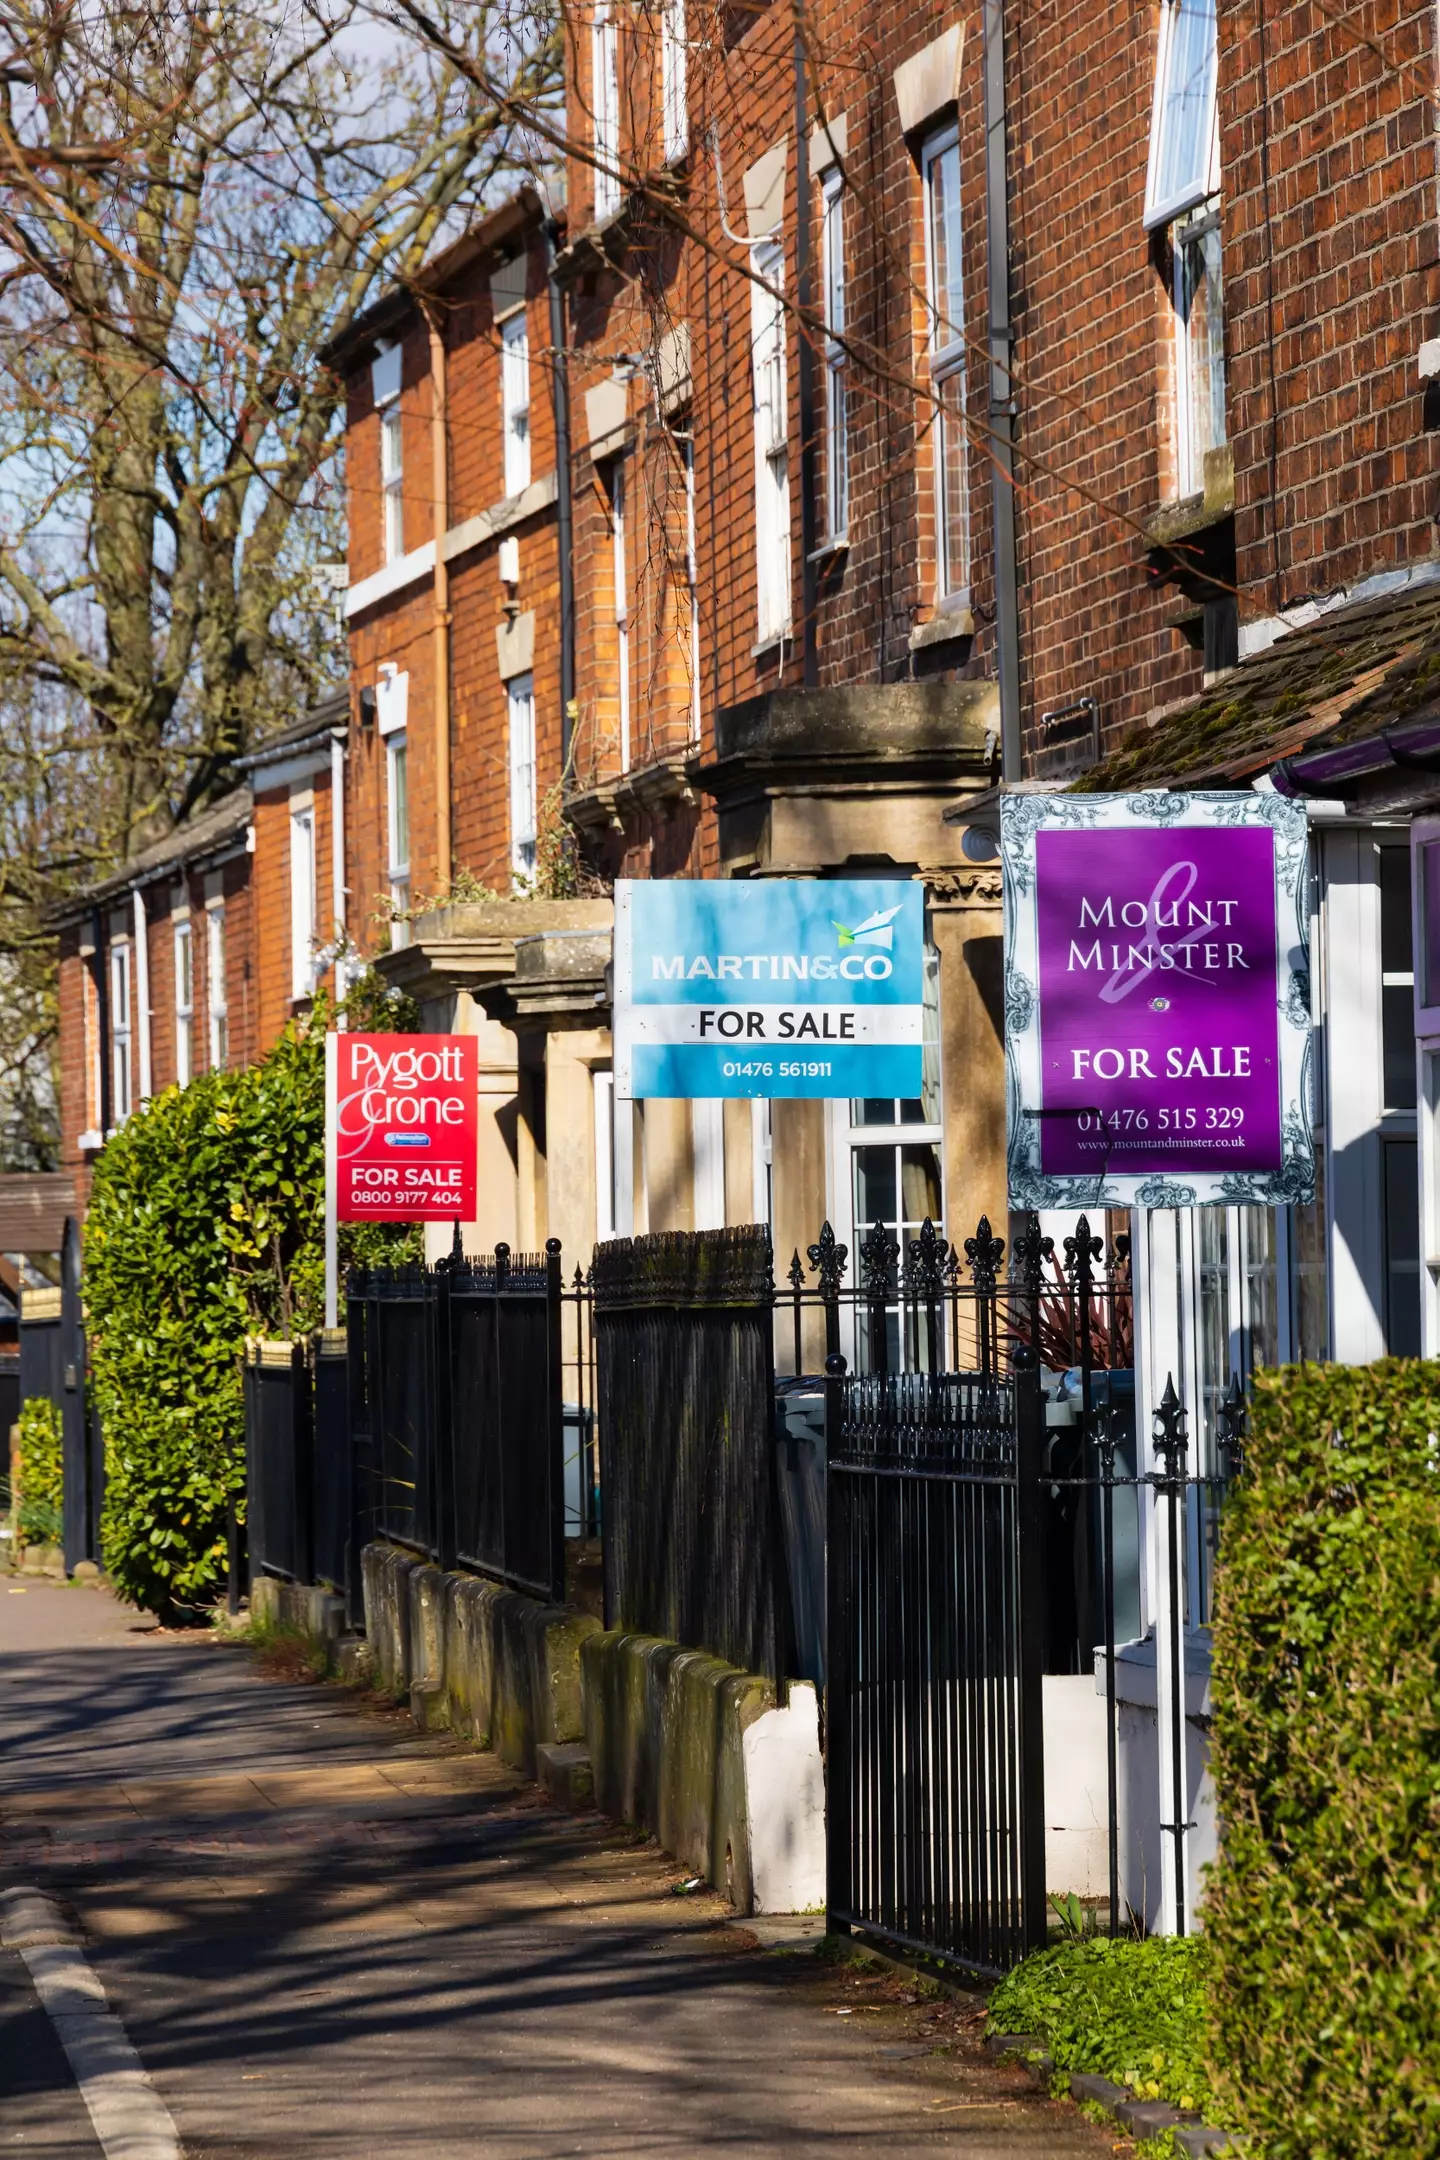 The average house price stands at over £260,000 (